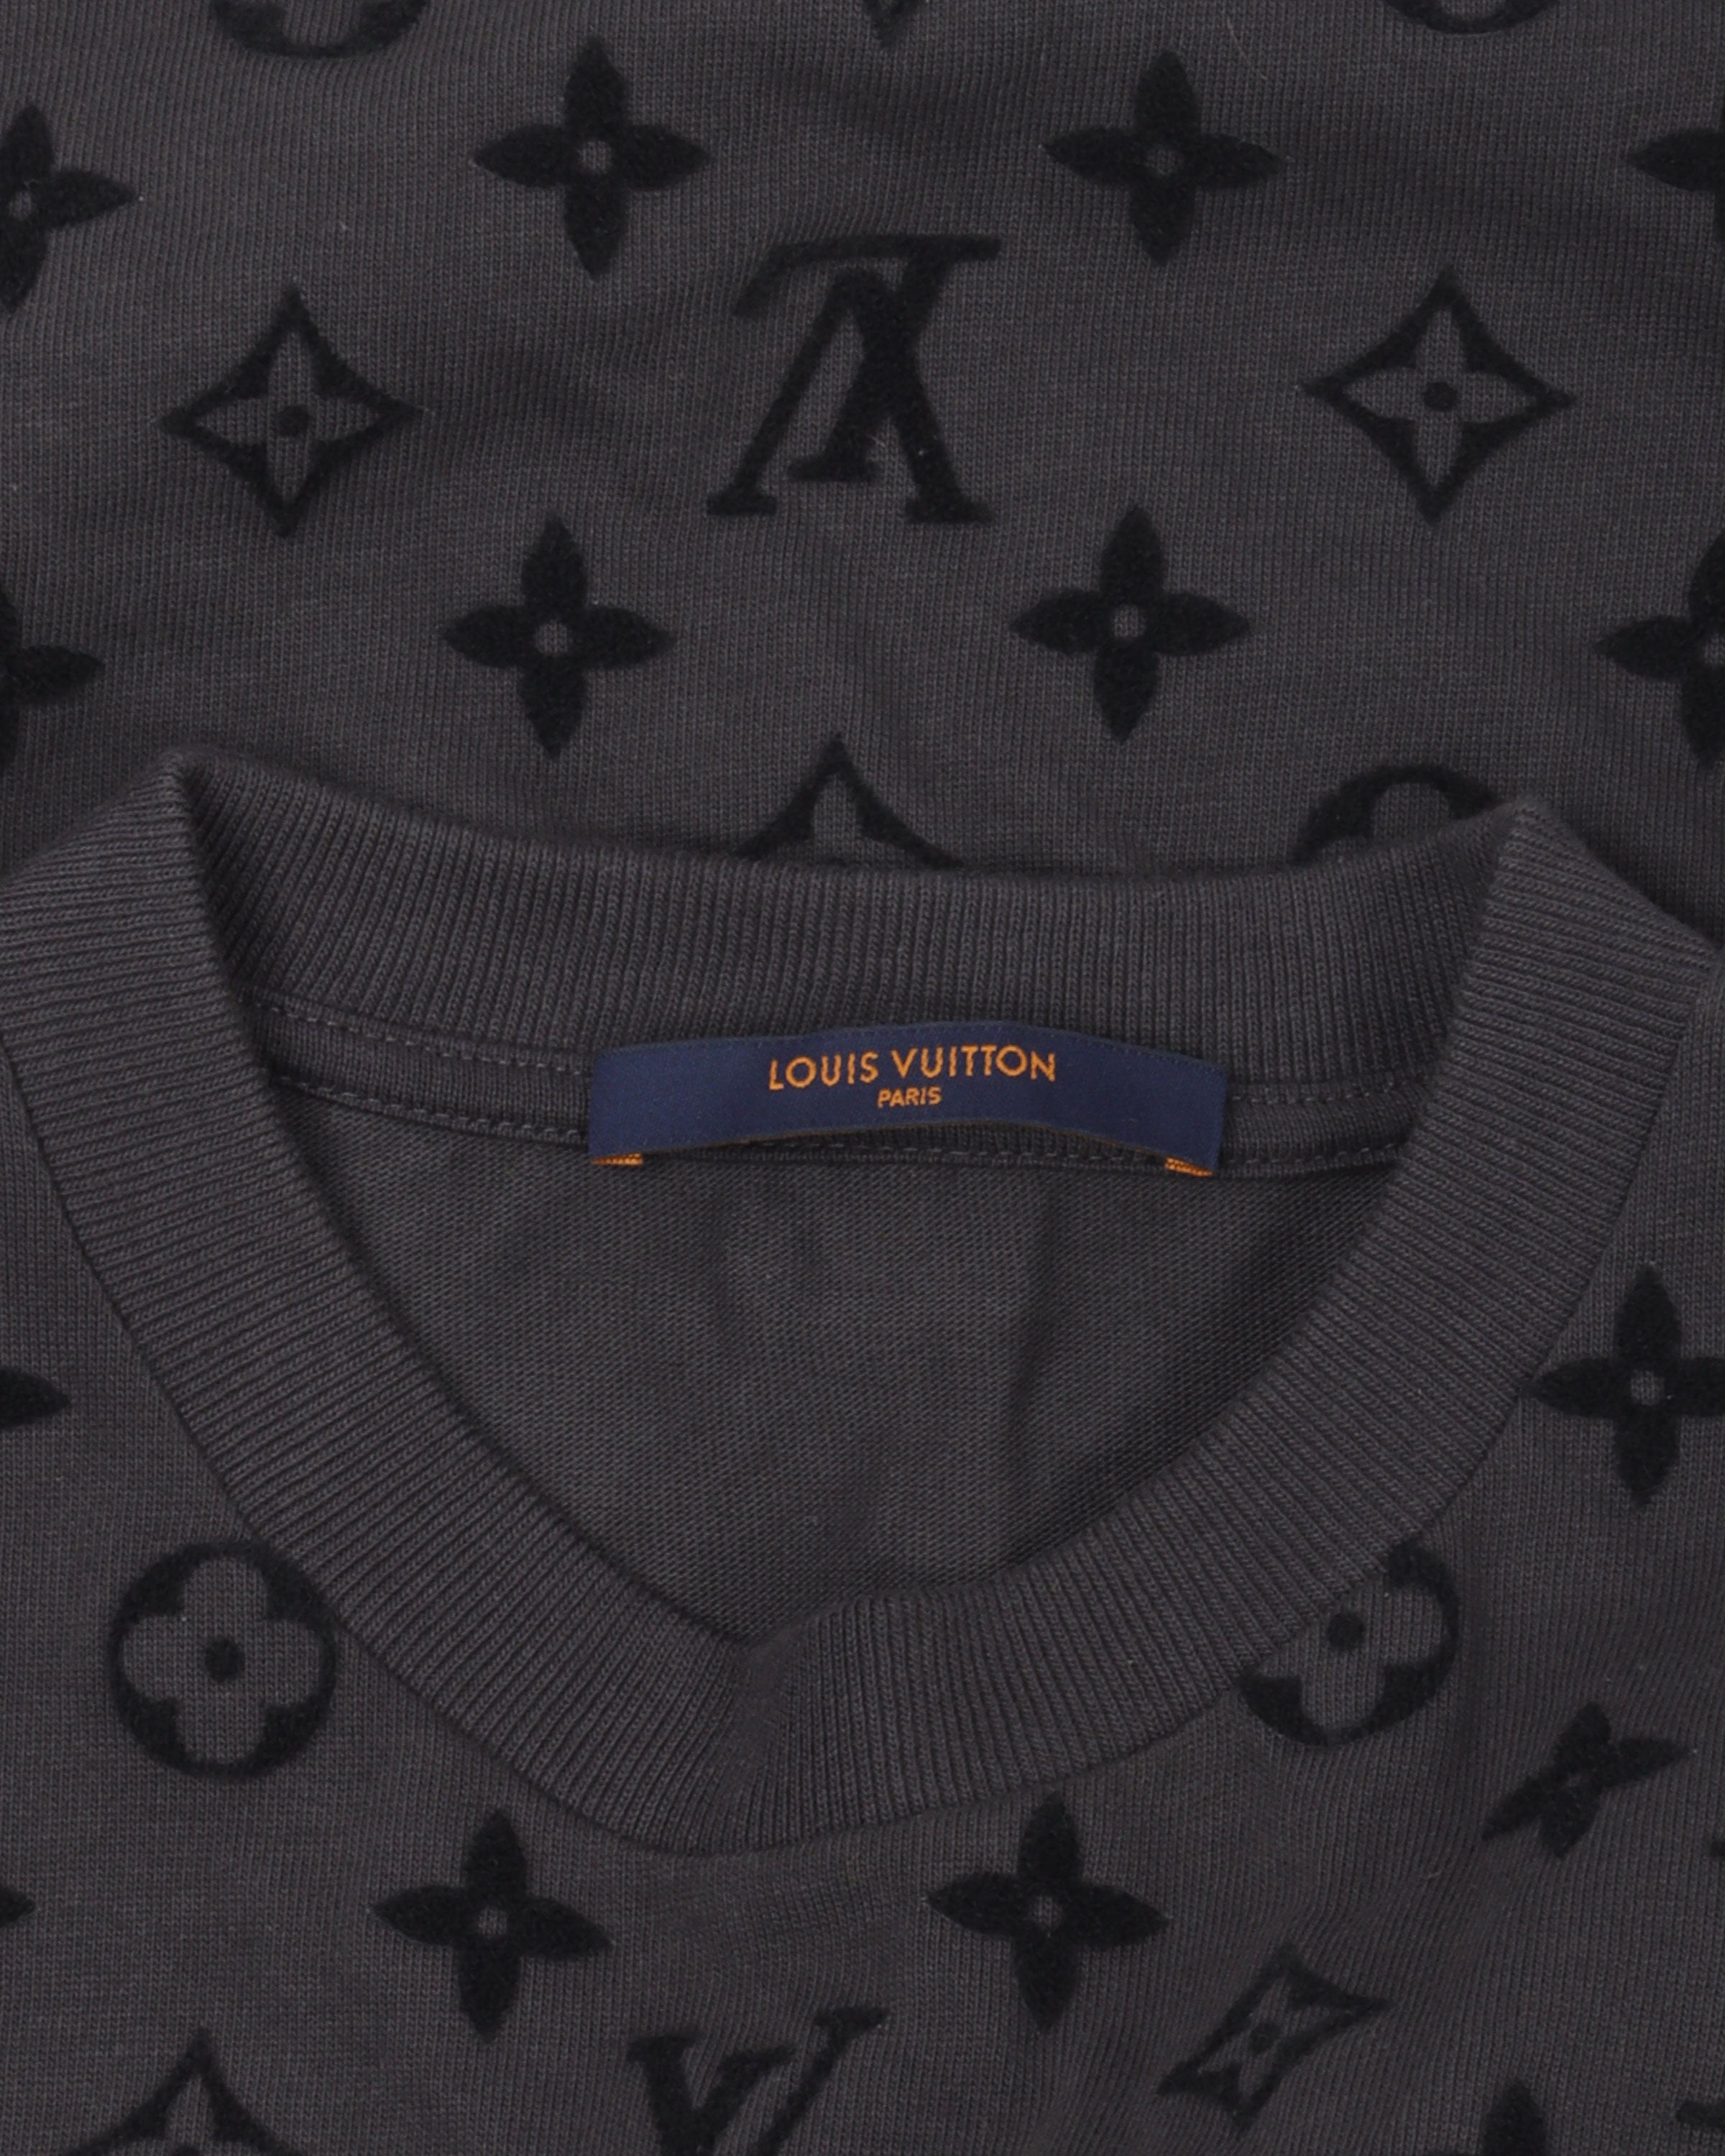 Products by Louis Vuitton: Monogram Pocket T-Shirt - Wishupon